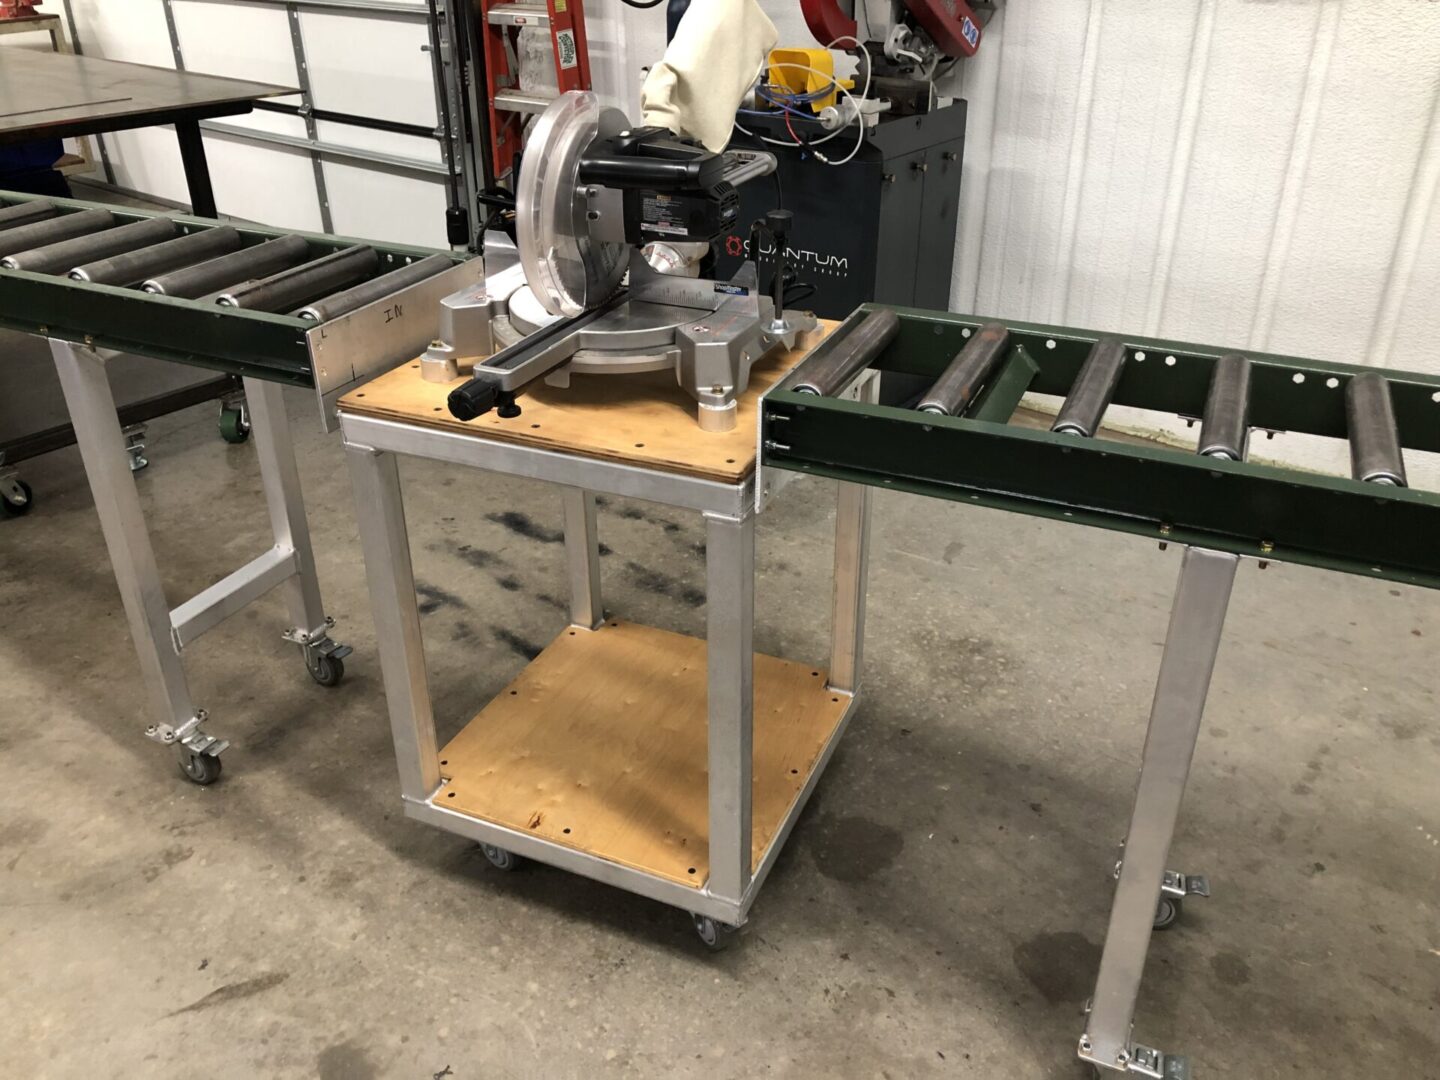 Angled view of the table with machine on top